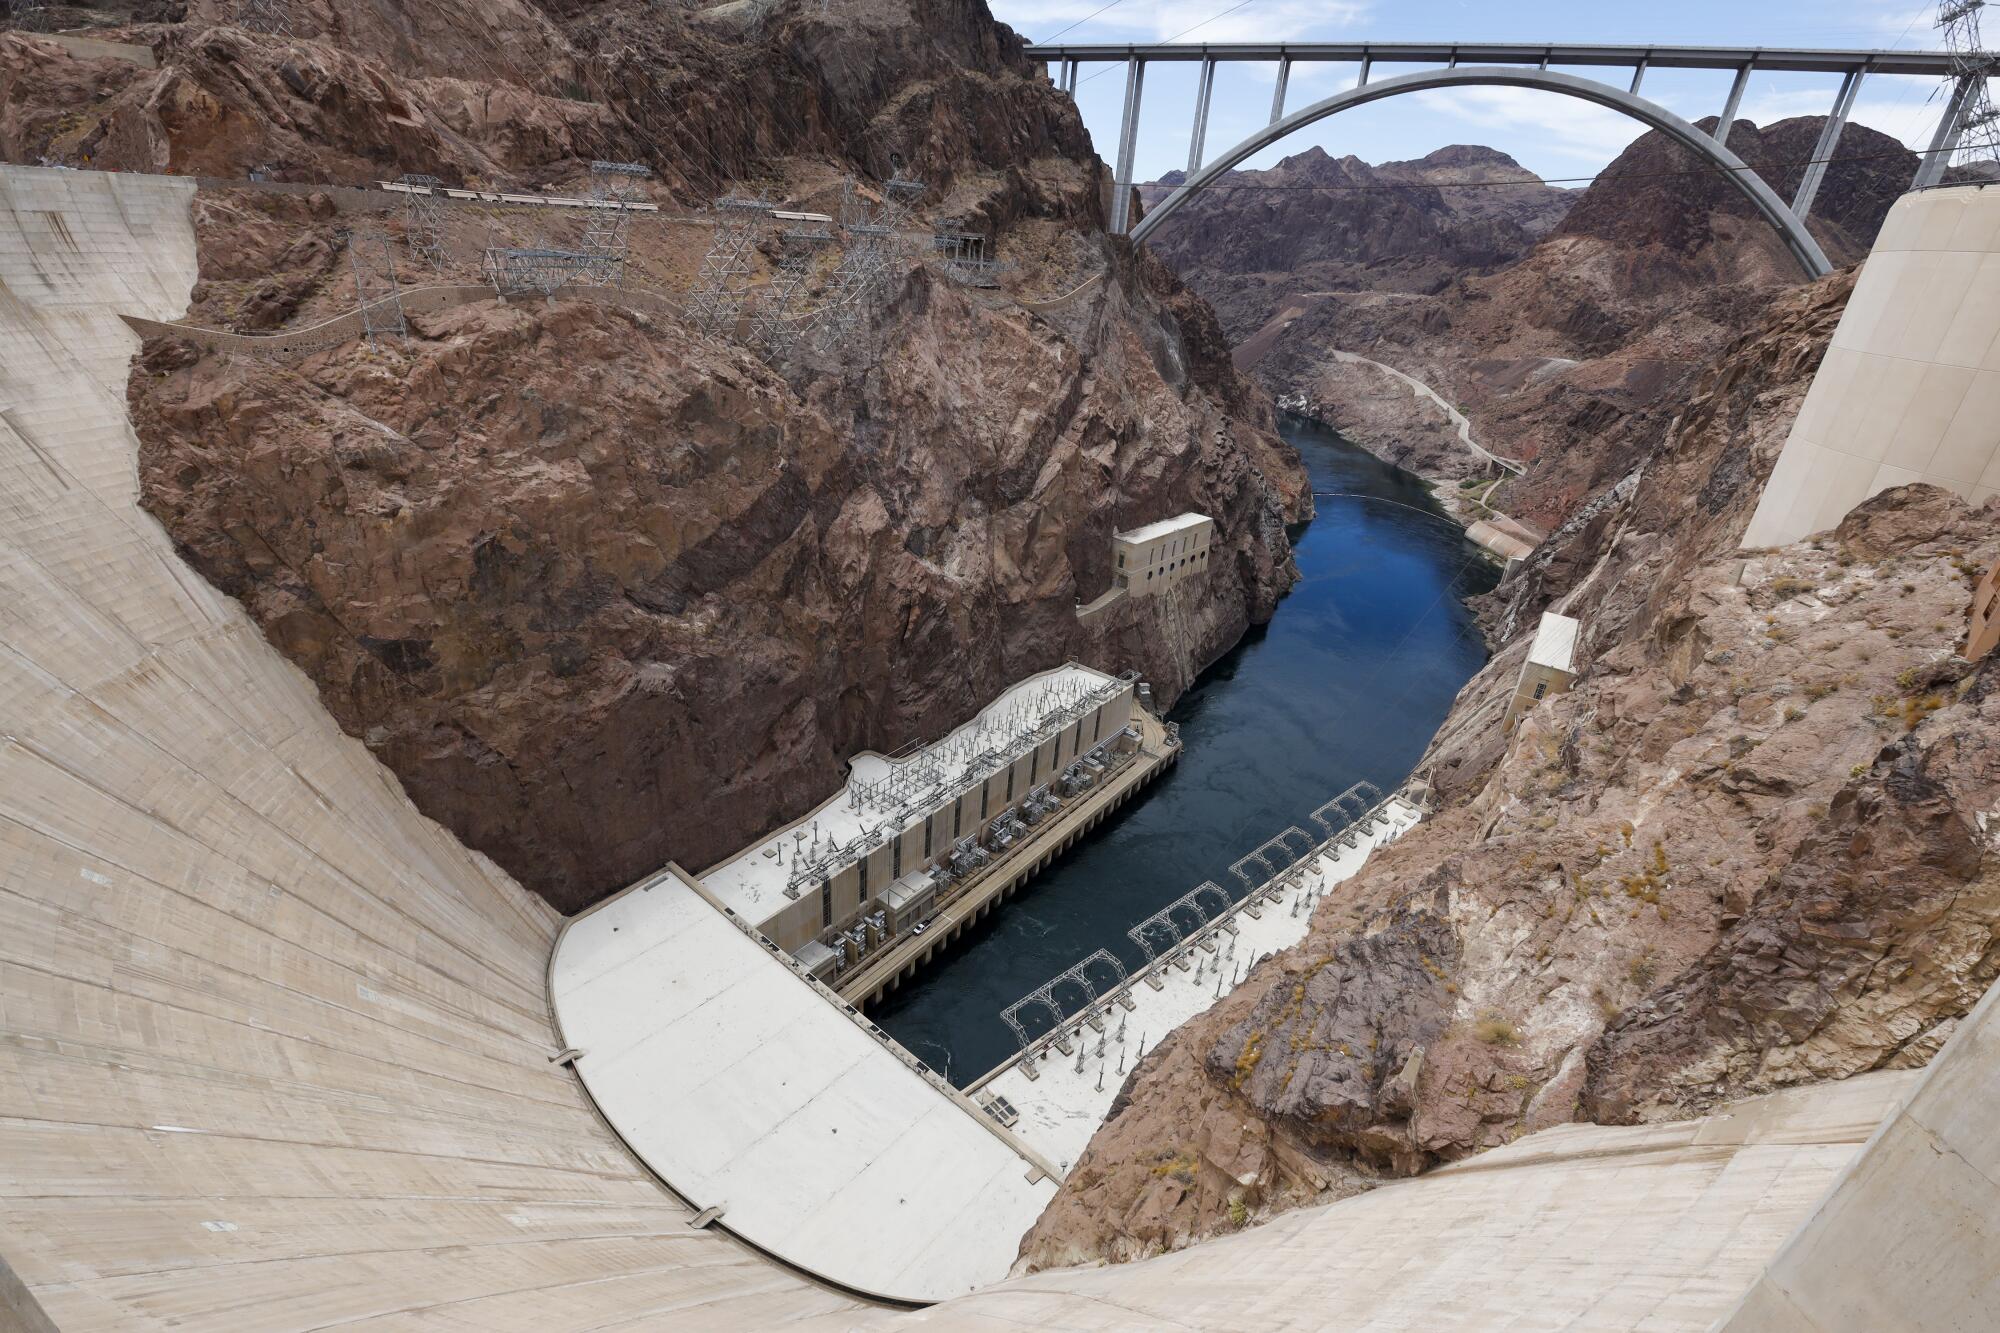 New Data Tools May Reduce Impacts of Colorado River Basin Drought, Article